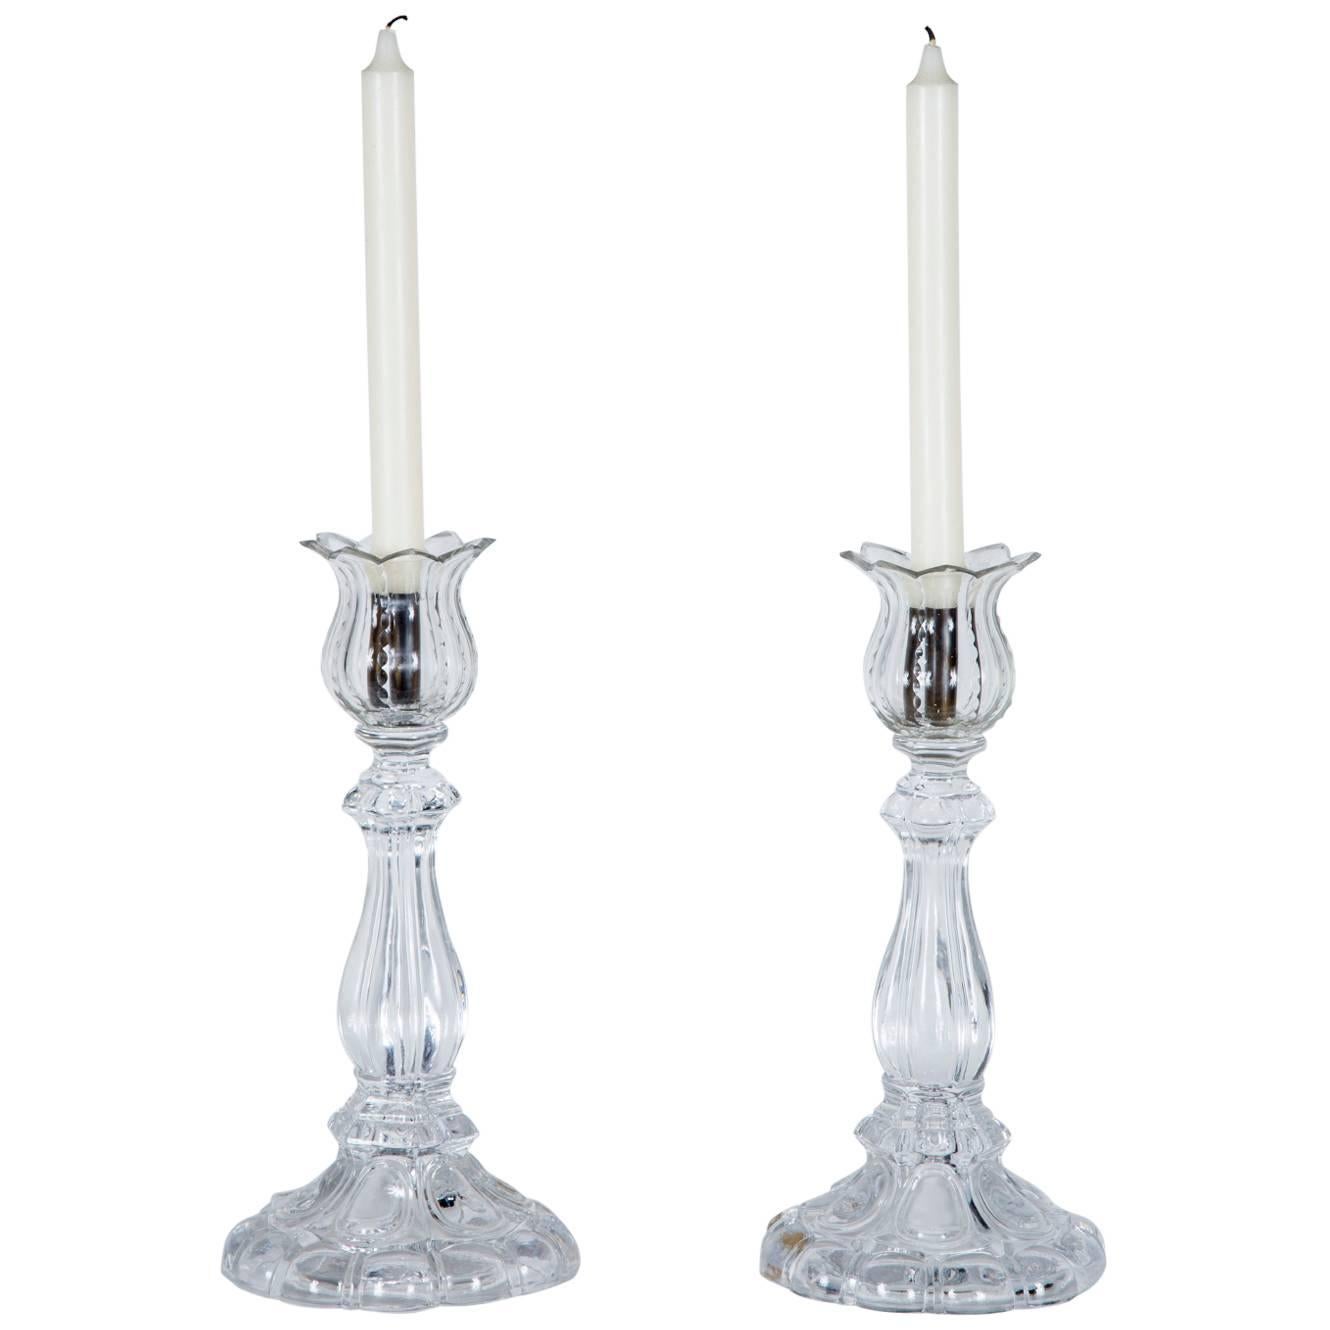 Pair of Louis Style Crystal Candlesticks